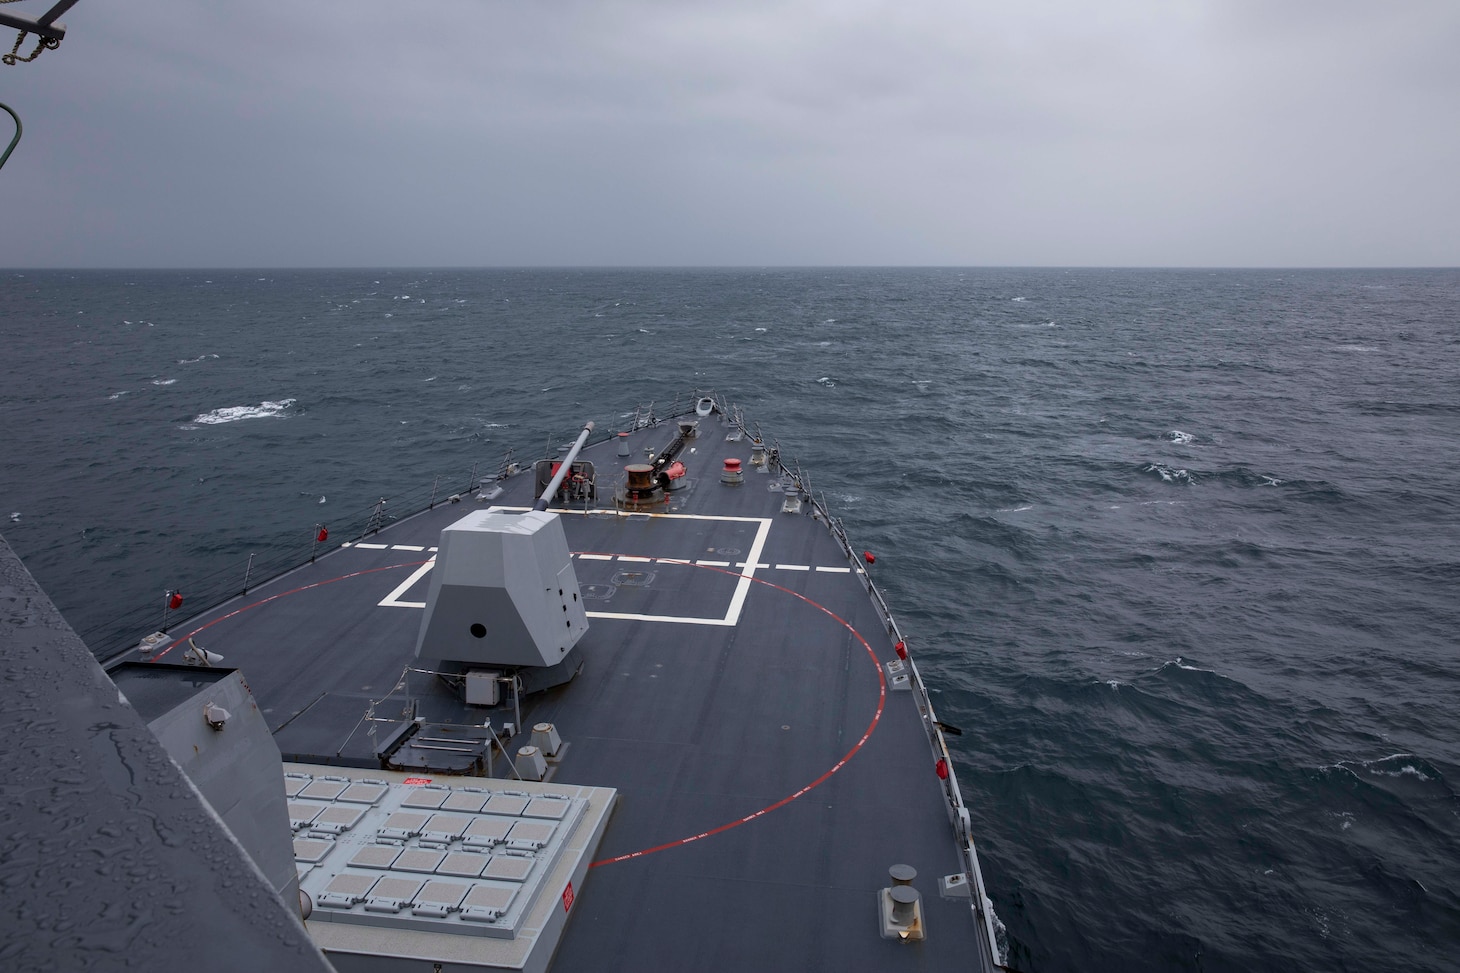 The Arleigh Burke-class guided-missile destroyer USS Ralph Johnson (DDG 114) conducts routine underway operations. Ralph Johnson is forward-deployed to the U.S. 7th Fleet area of operations in support of a free and open Indo-Pacific.